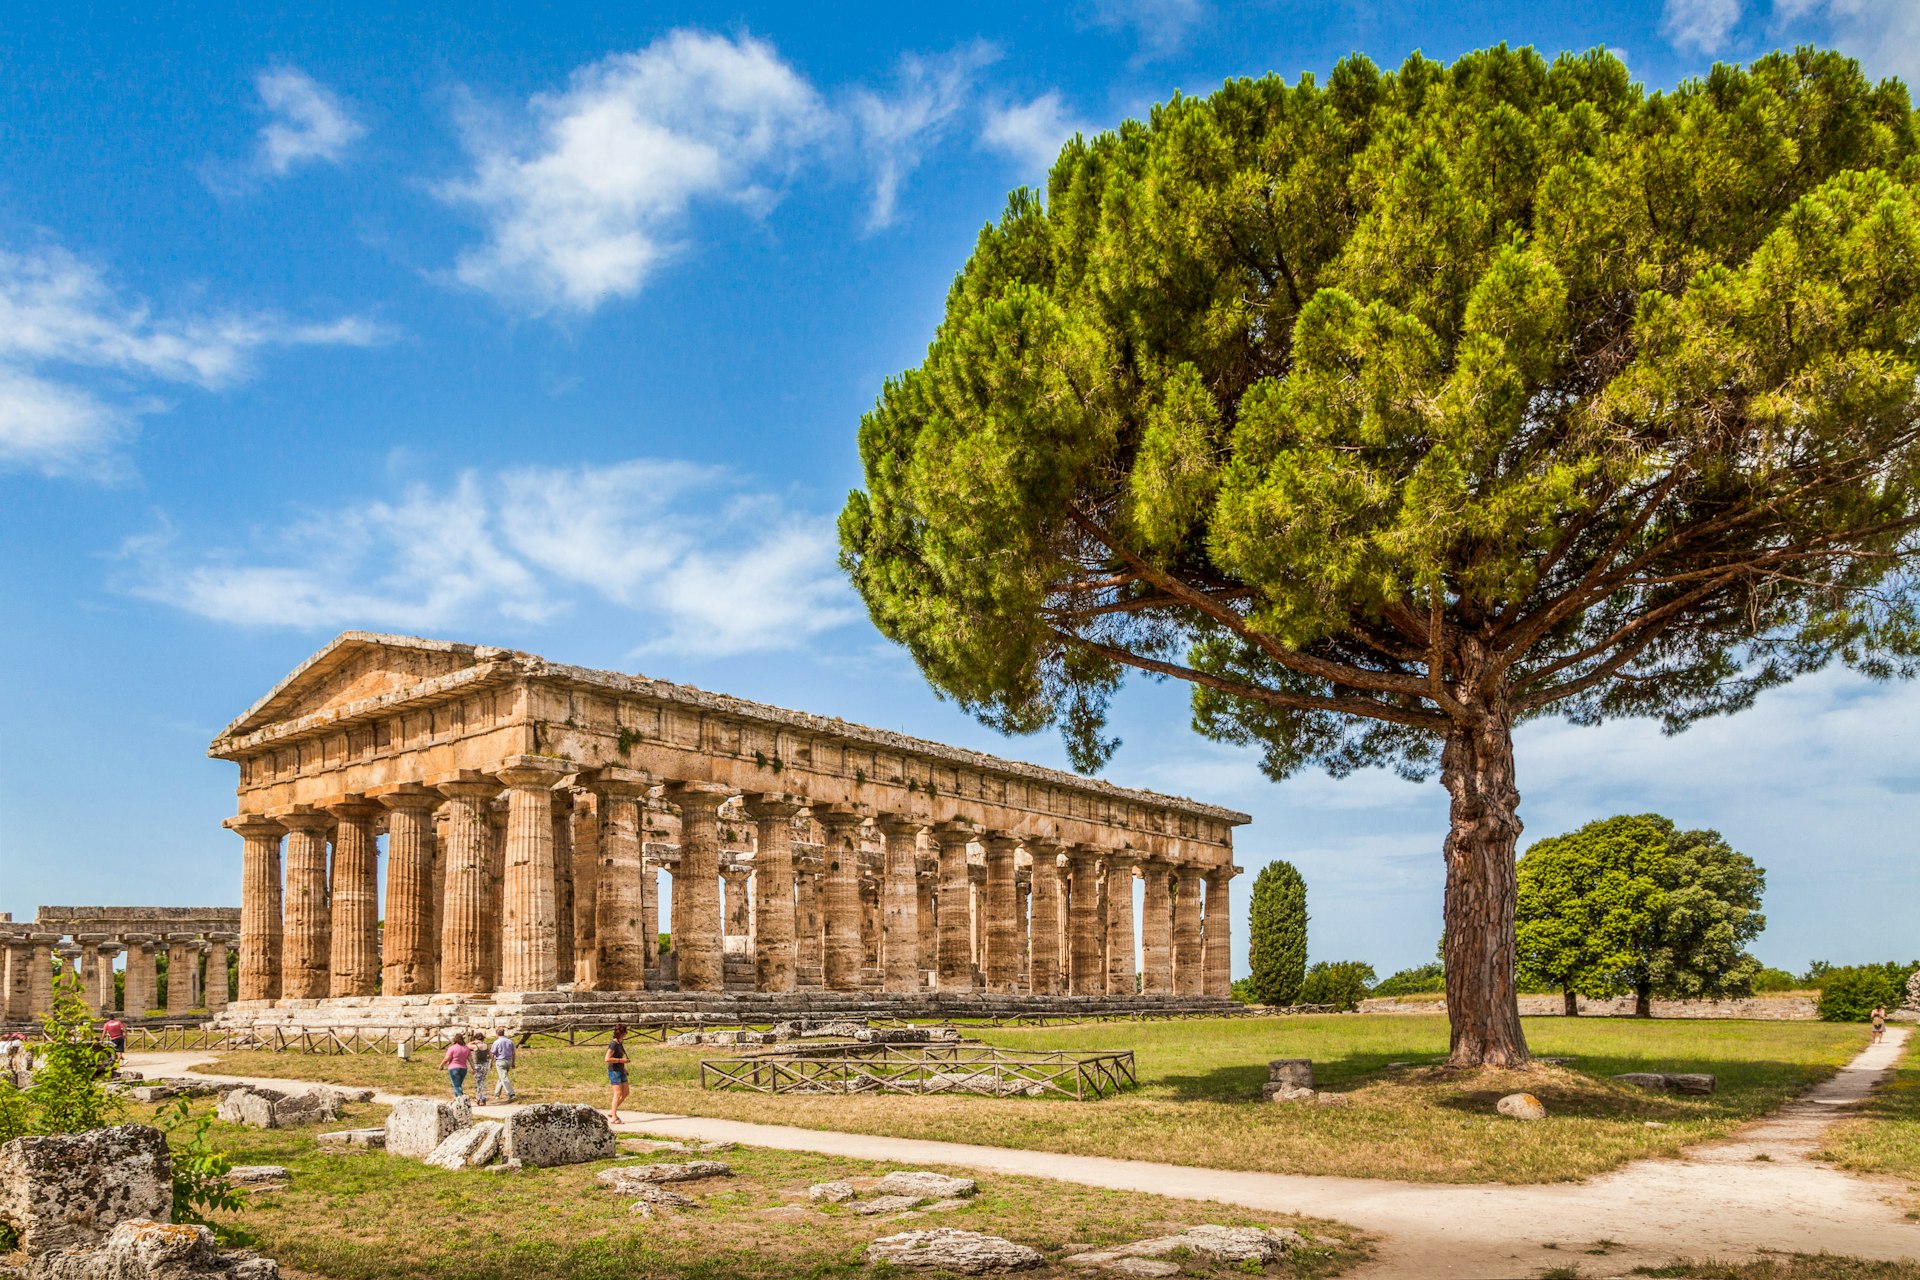 The Temple of Hera at the famous Paestum Archaeological UNESCO World Heritage Site